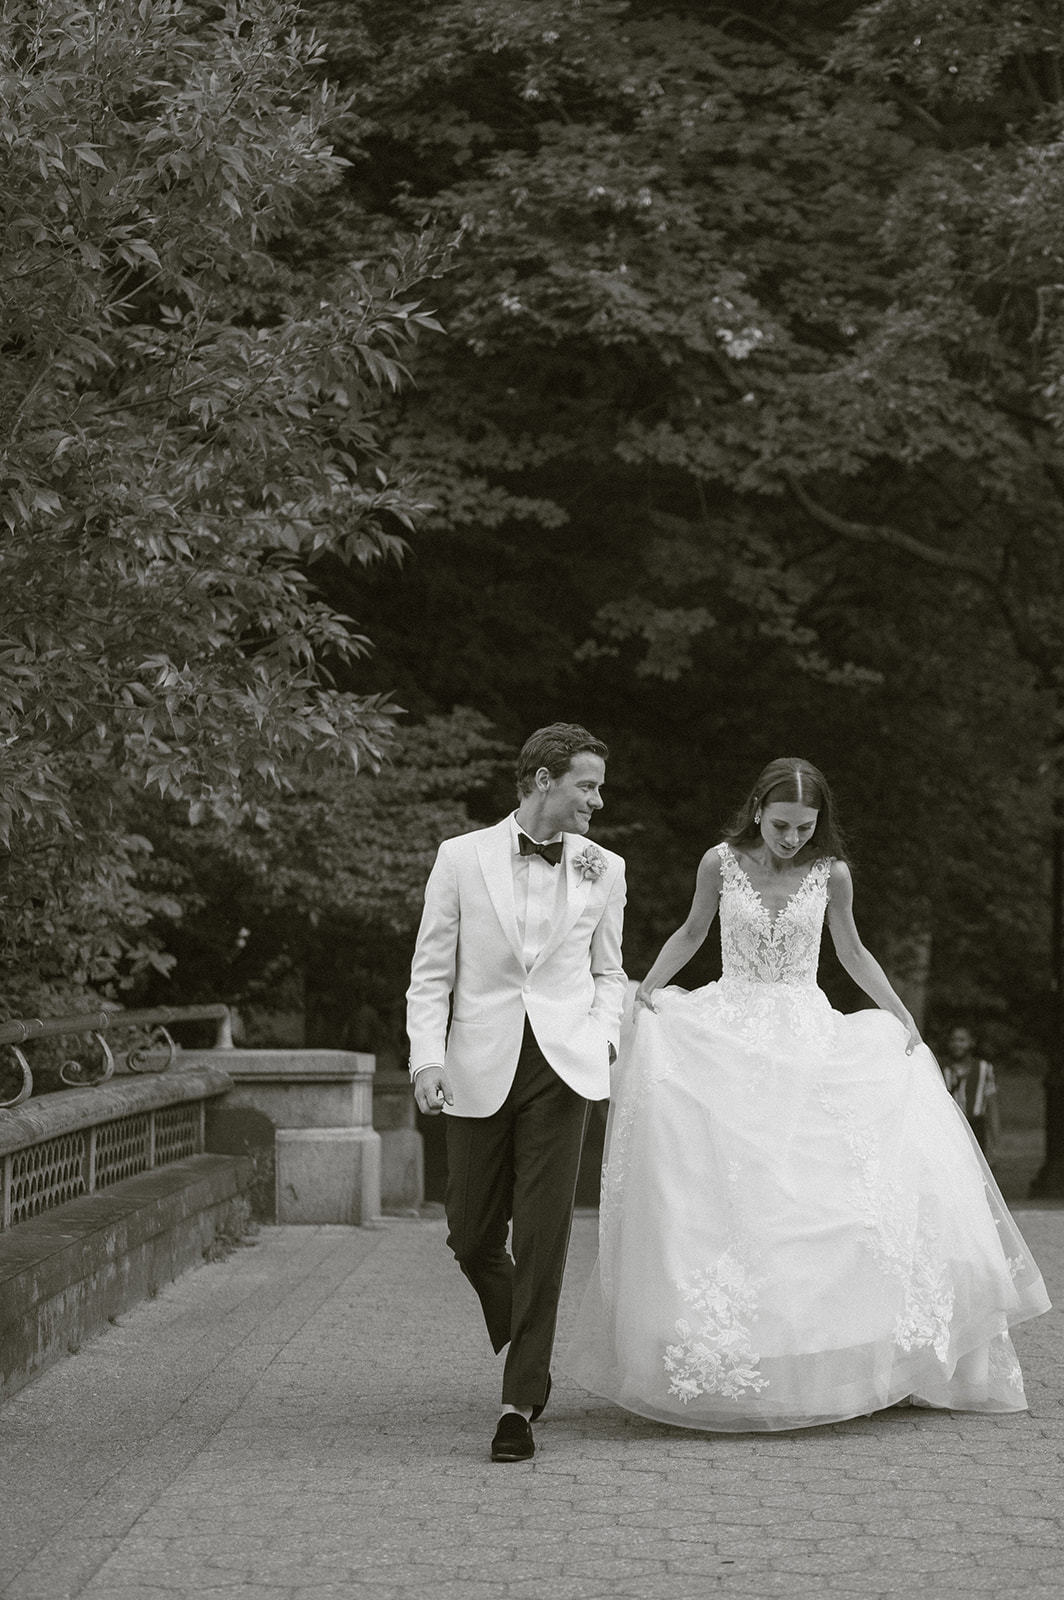 Classic black and white wedding photography in New York City